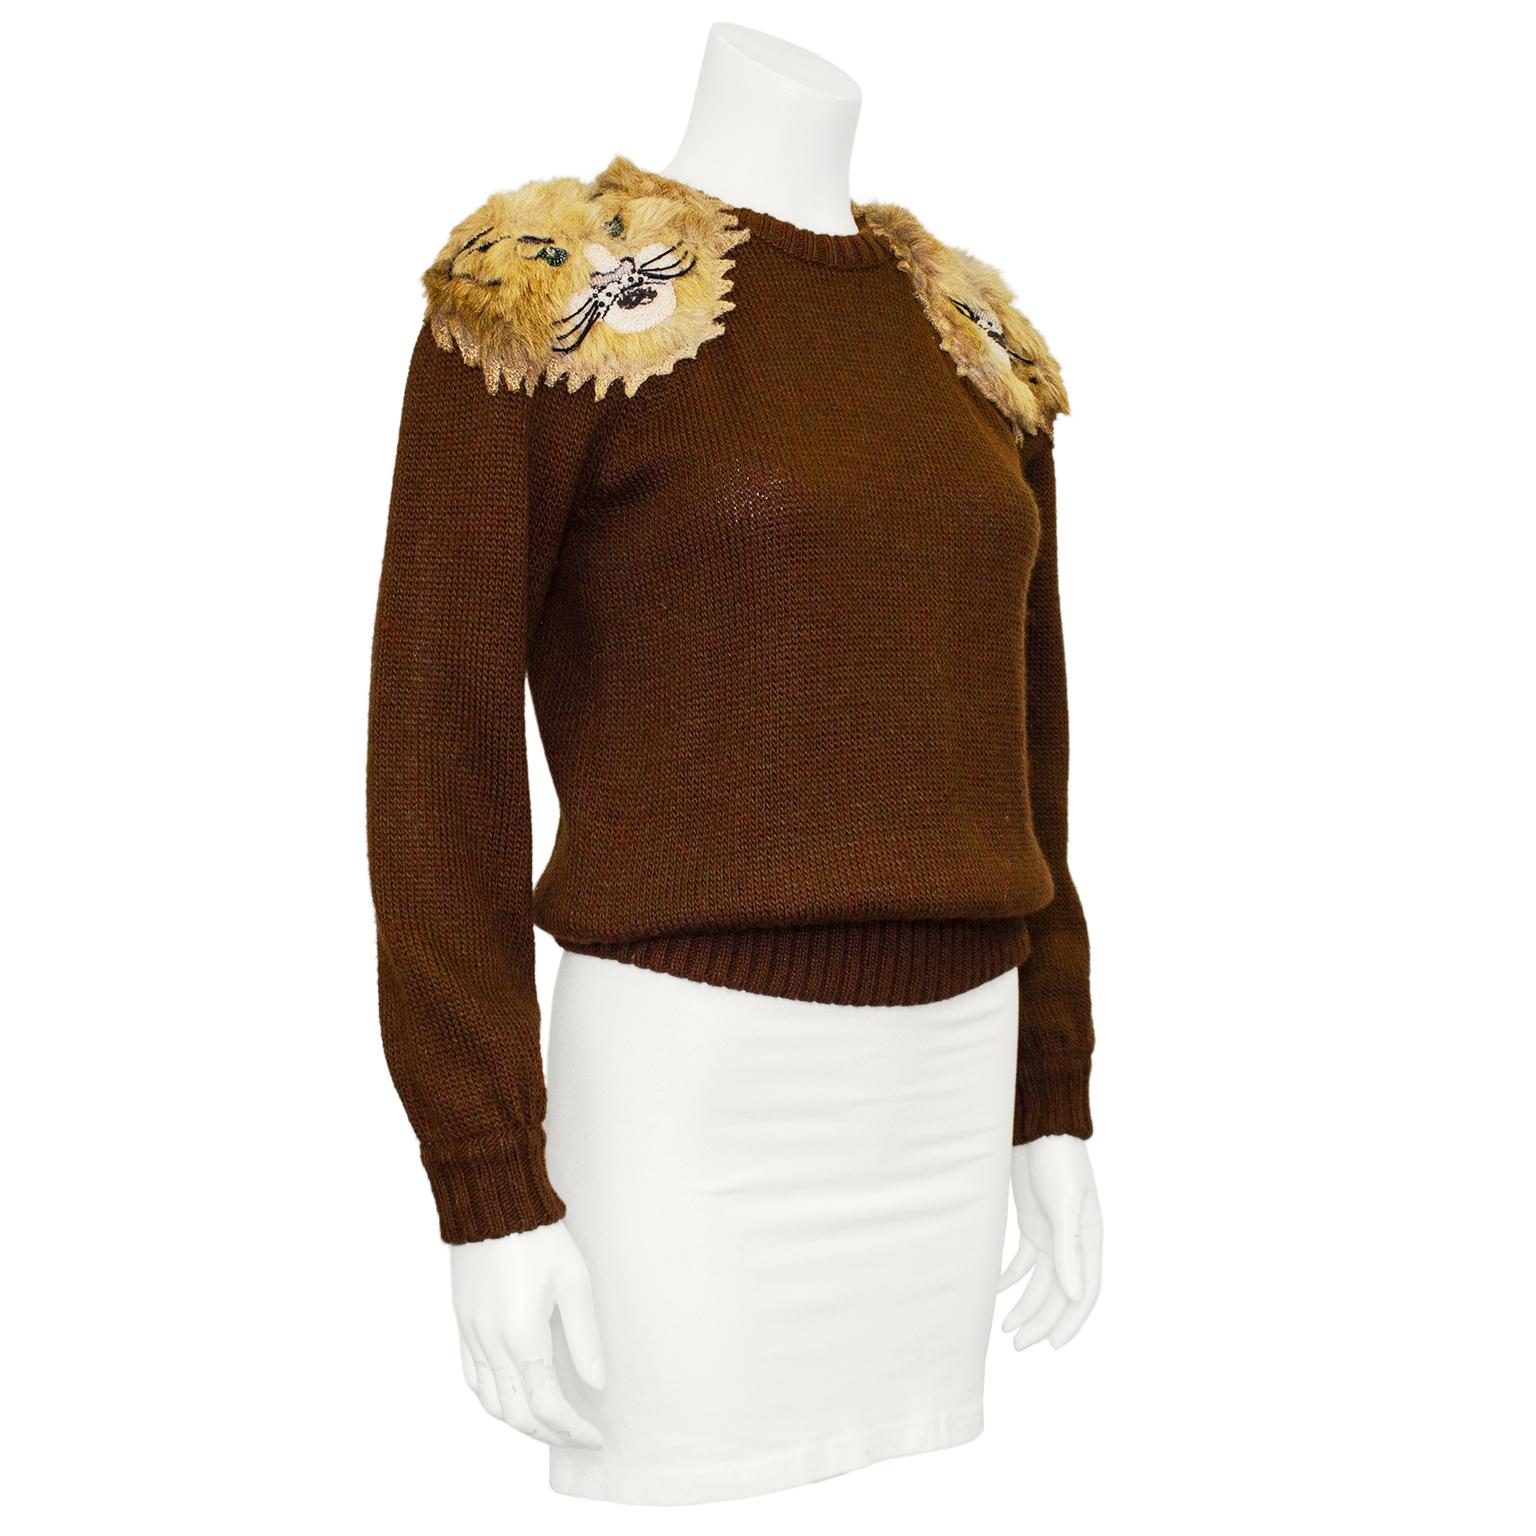 Known for their incredible knits featuring animals, this sweater is the ultimate Krizia piece. Perfect with jeans, the lion head appliques on the shoulders are detailed with sequin eyes, noses and whiskers. Made of half wool and acrylic, the brown